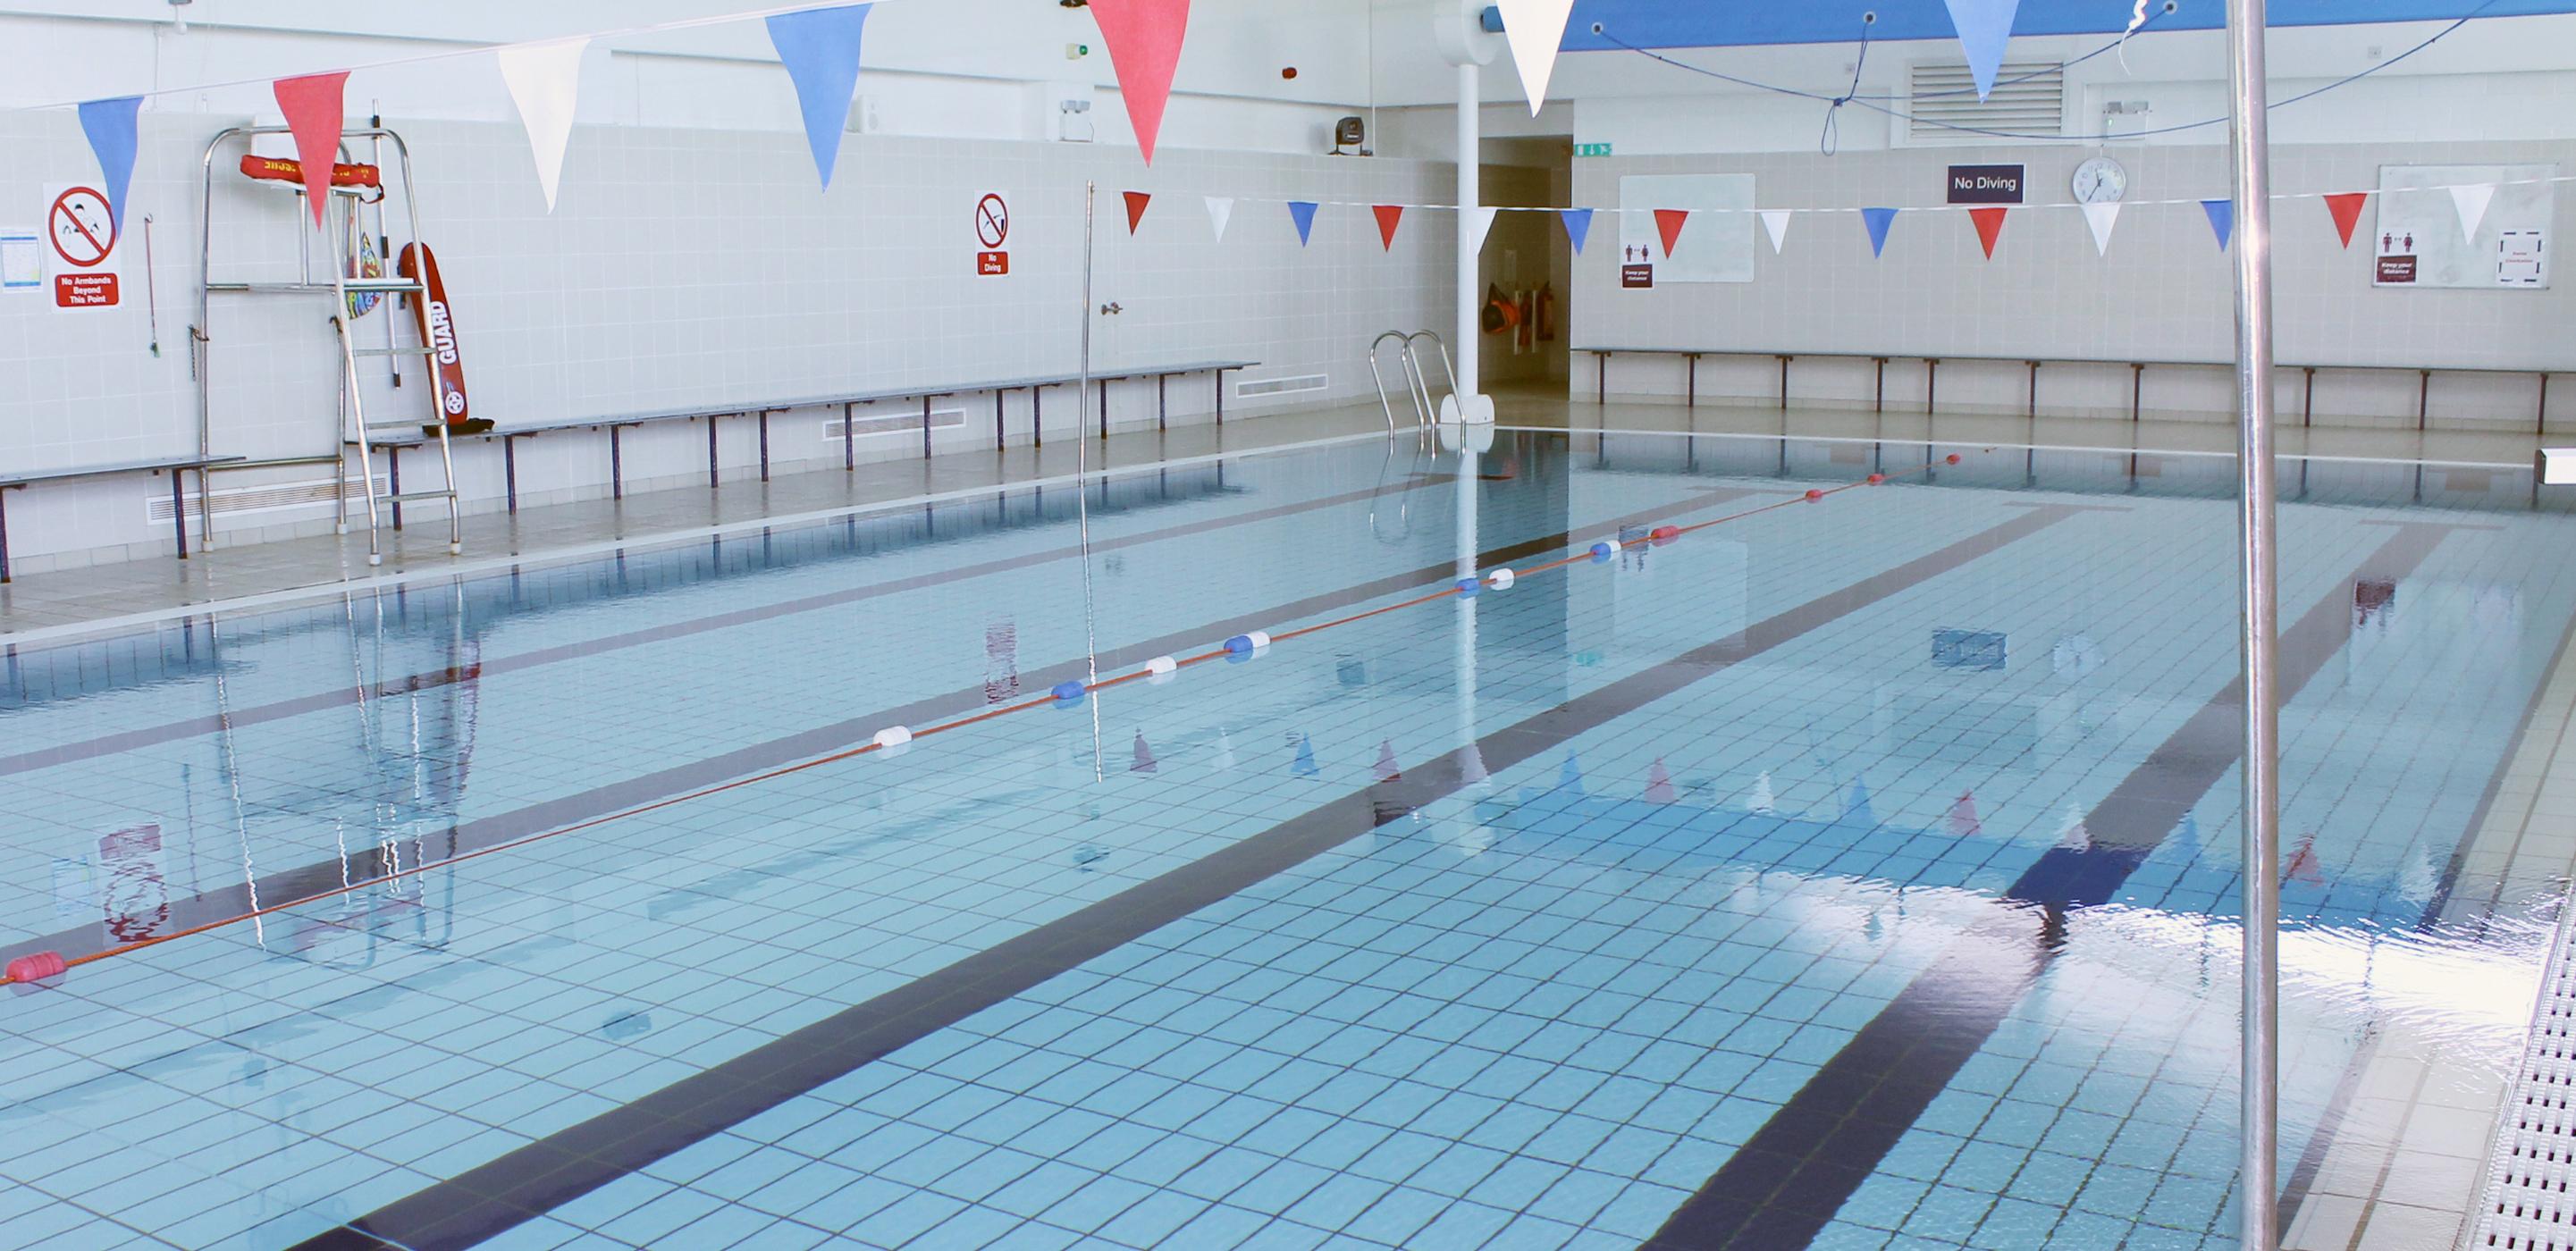 Nidderdale Pool and Leisure Centre swimming pool